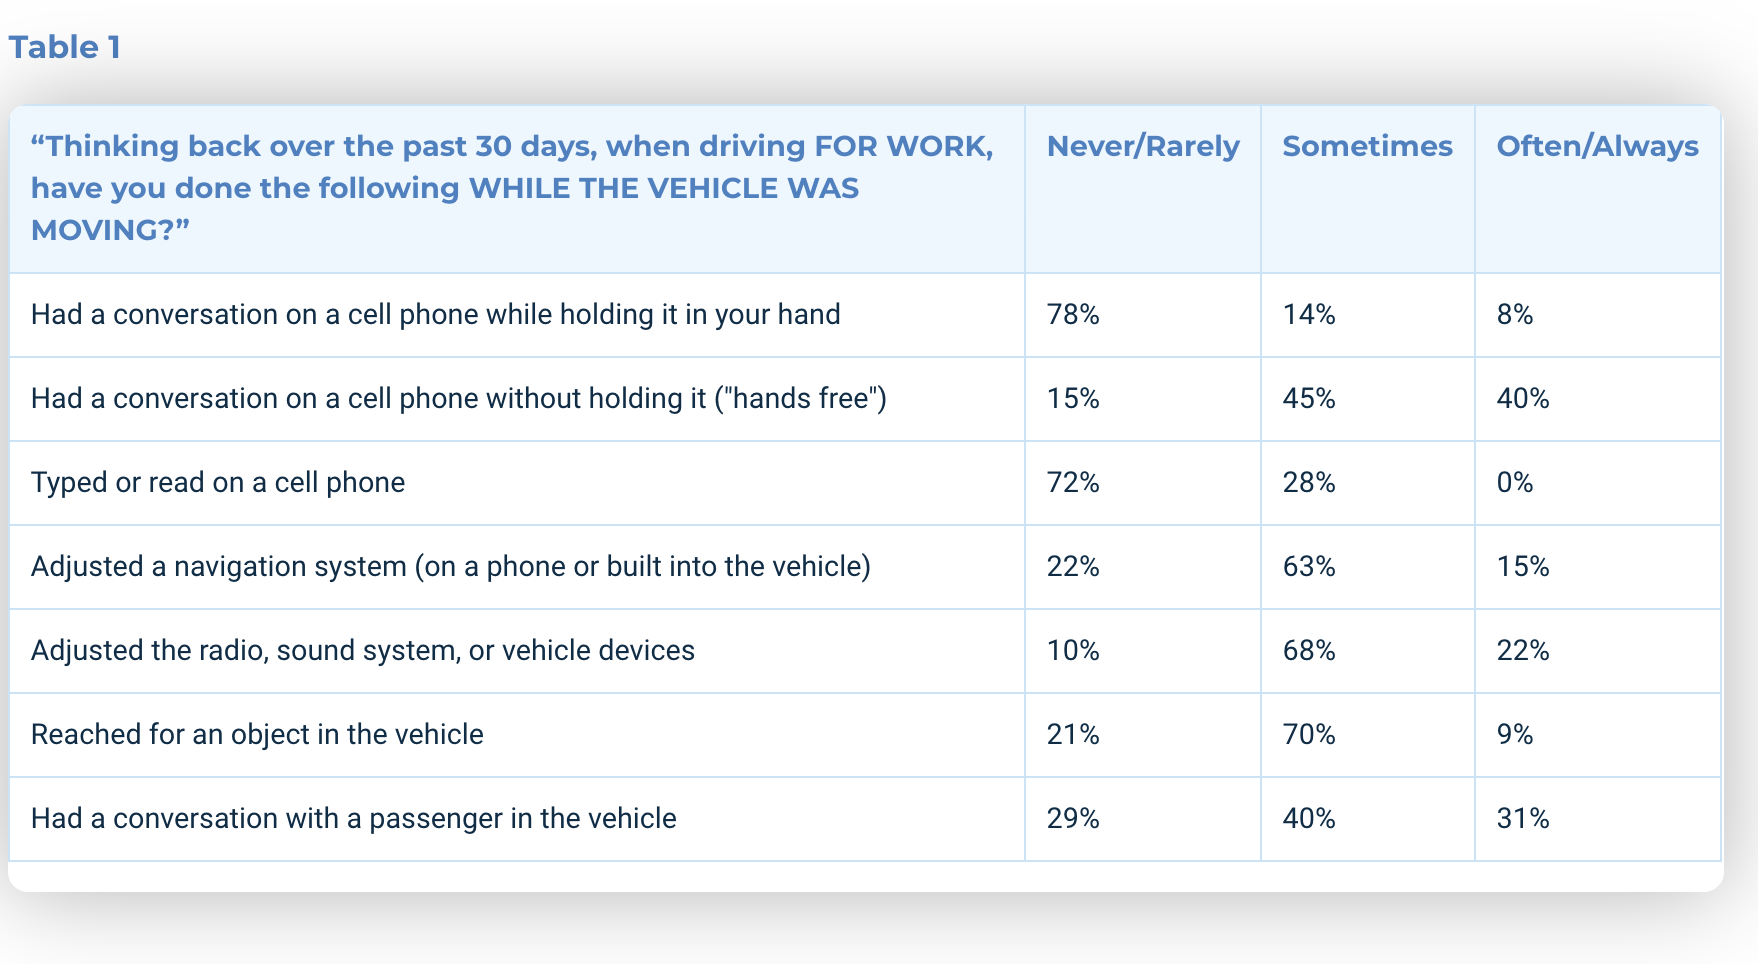 Prevalence of Distracted Driving Behaviors